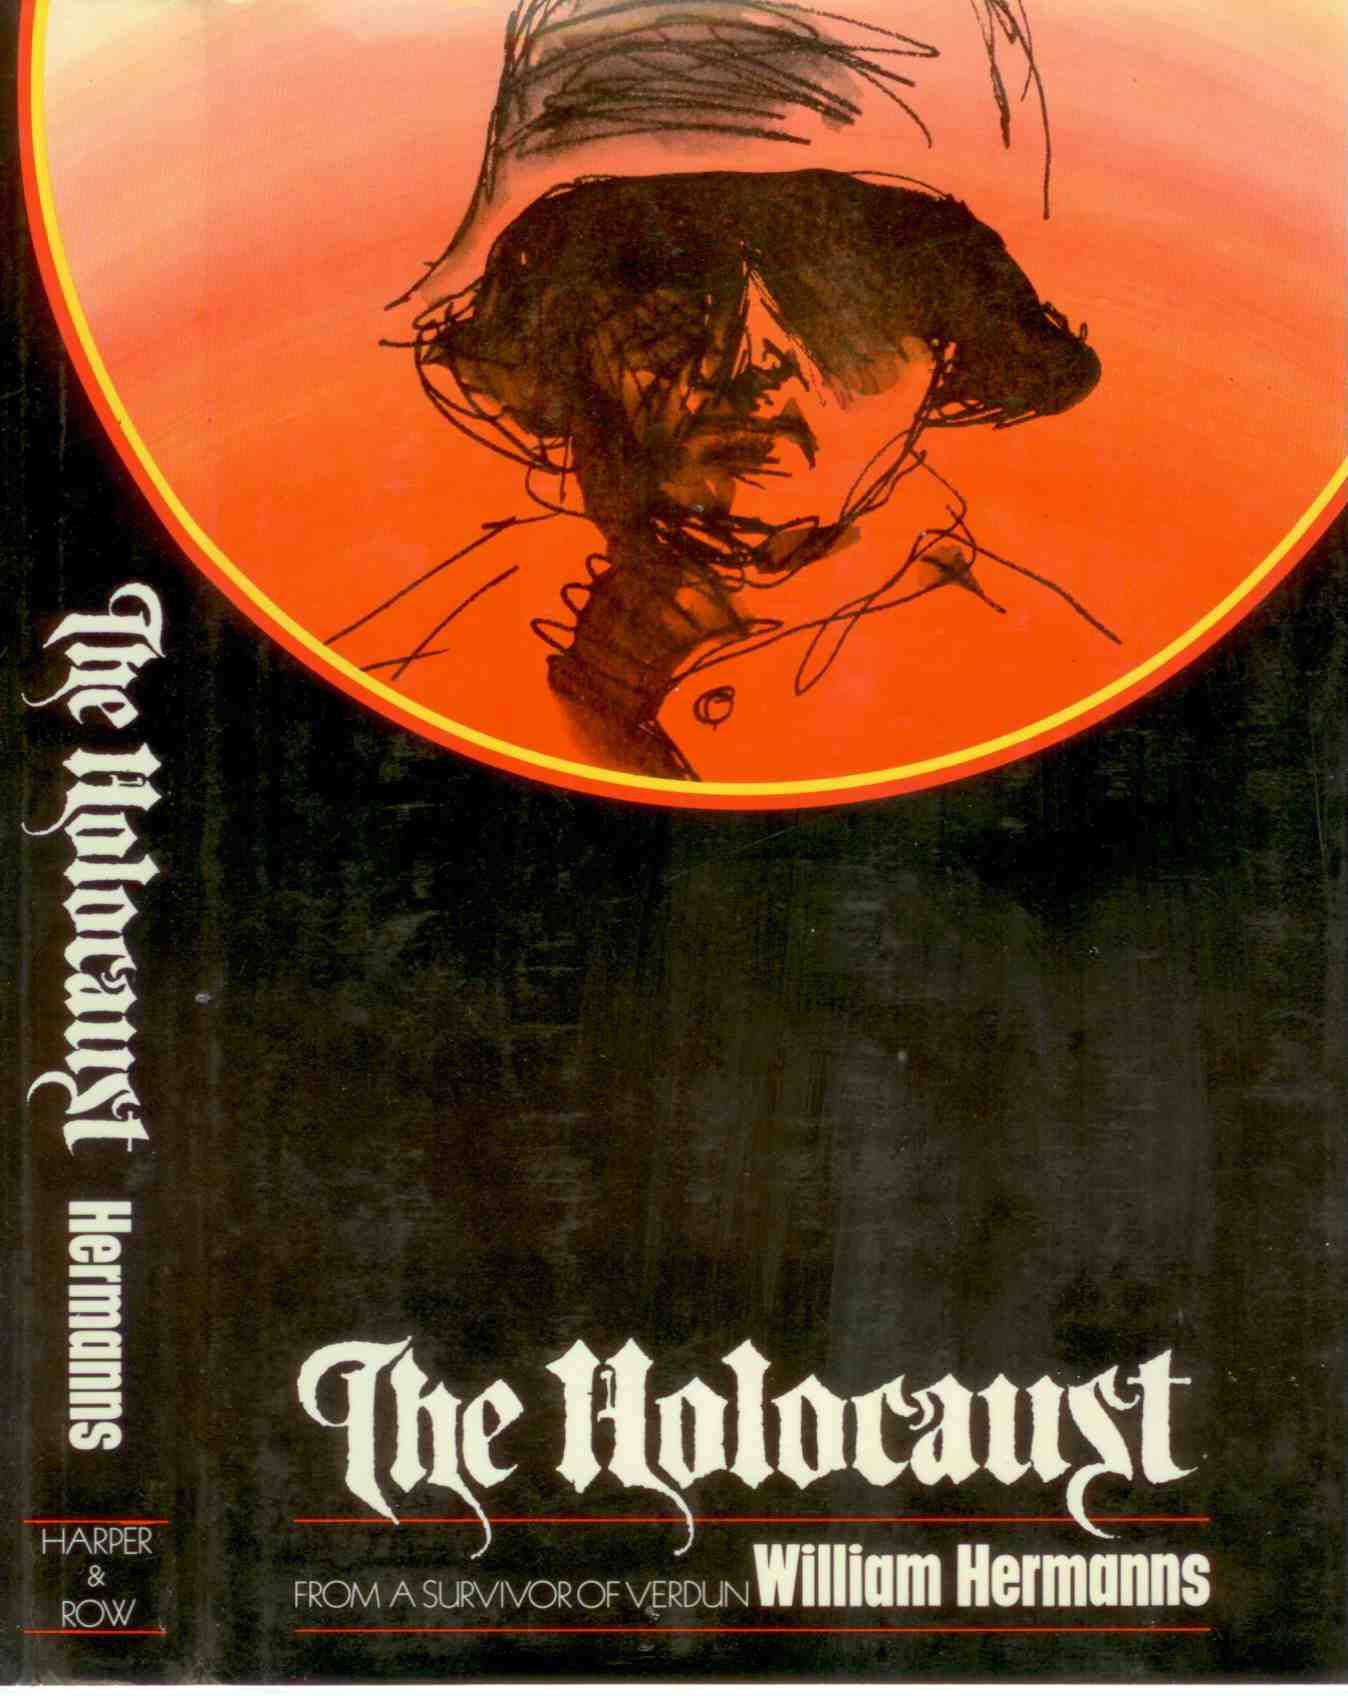 The Holocaust - from a surivor of Verdun by William Hermanns cover